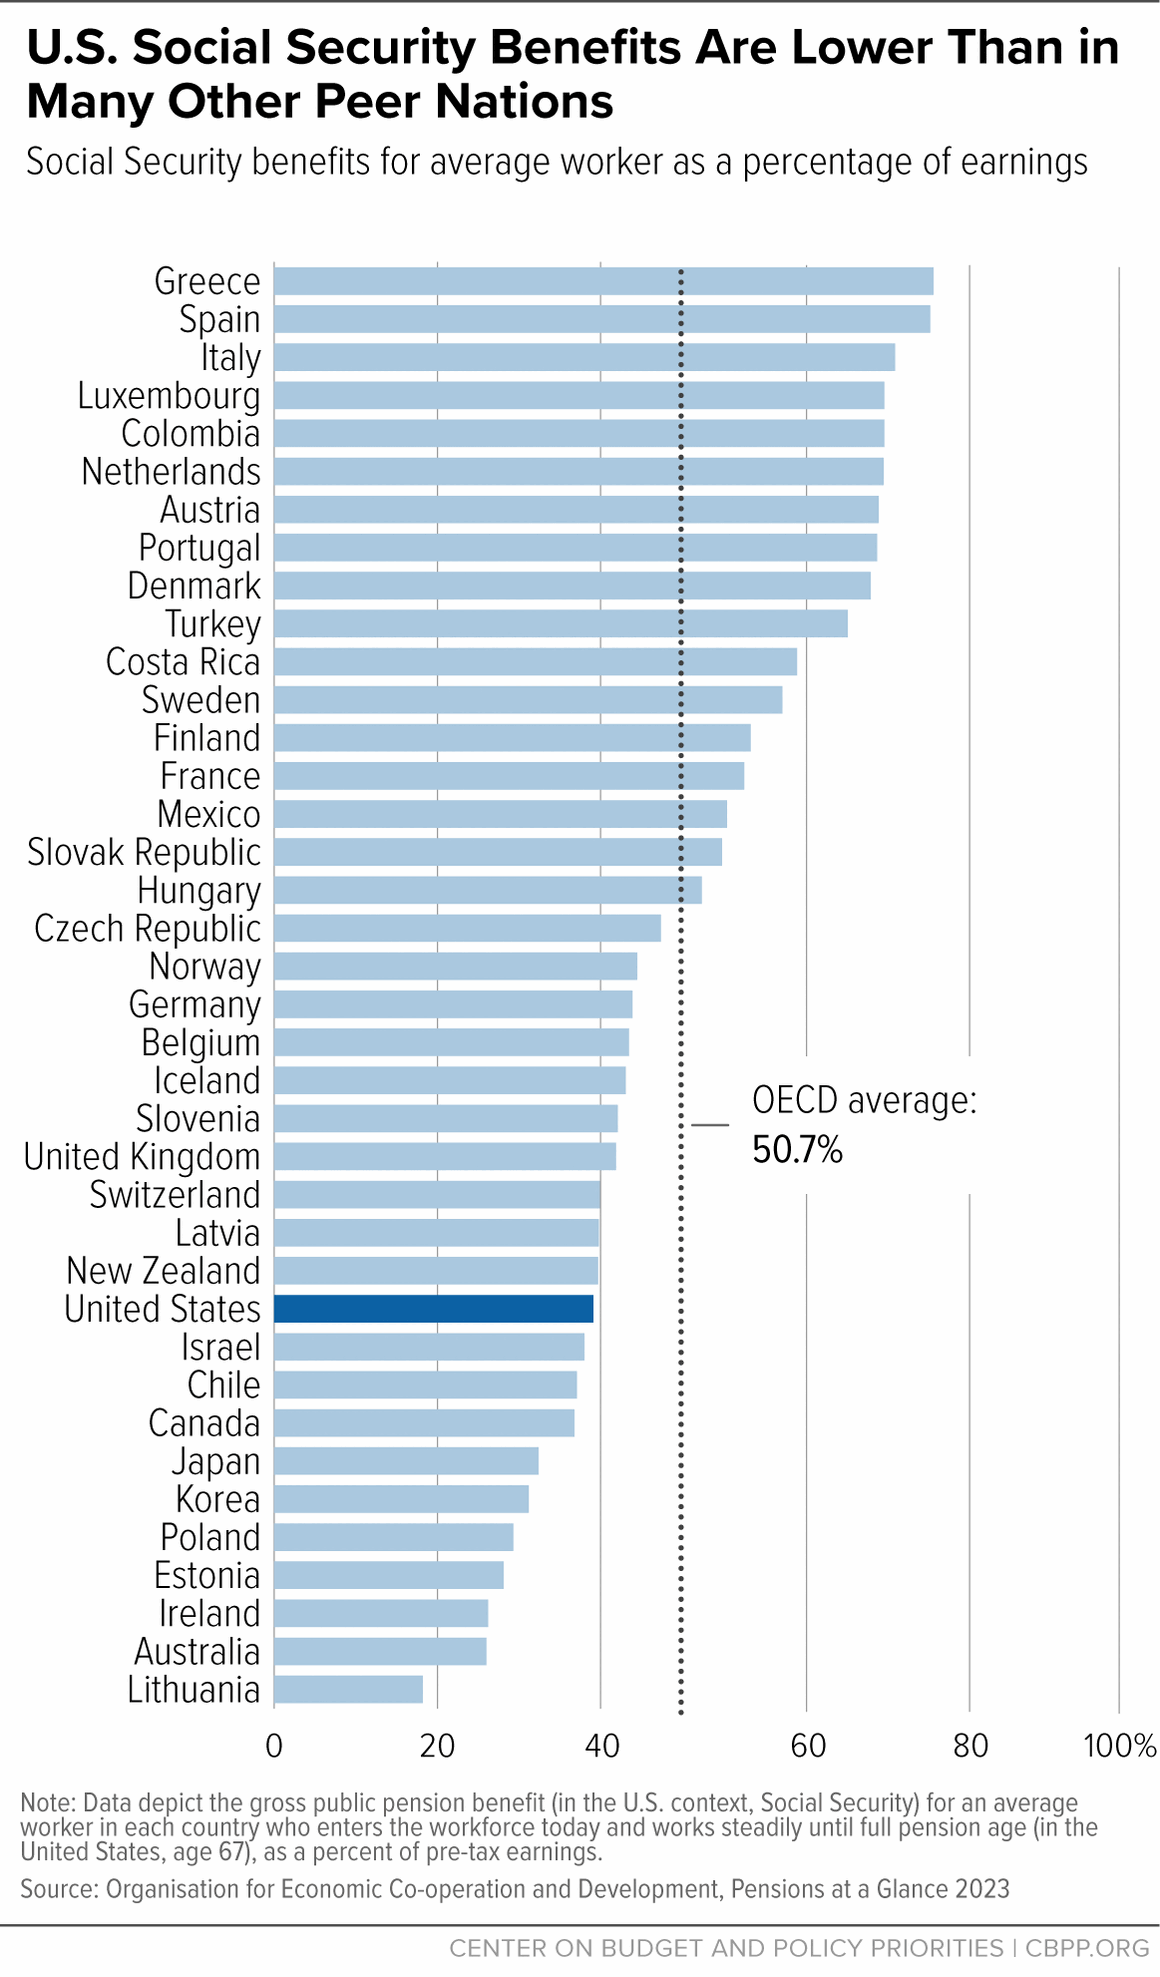 U.S. Social Security Benefits Are Lower Than in Many Other Peer Nations